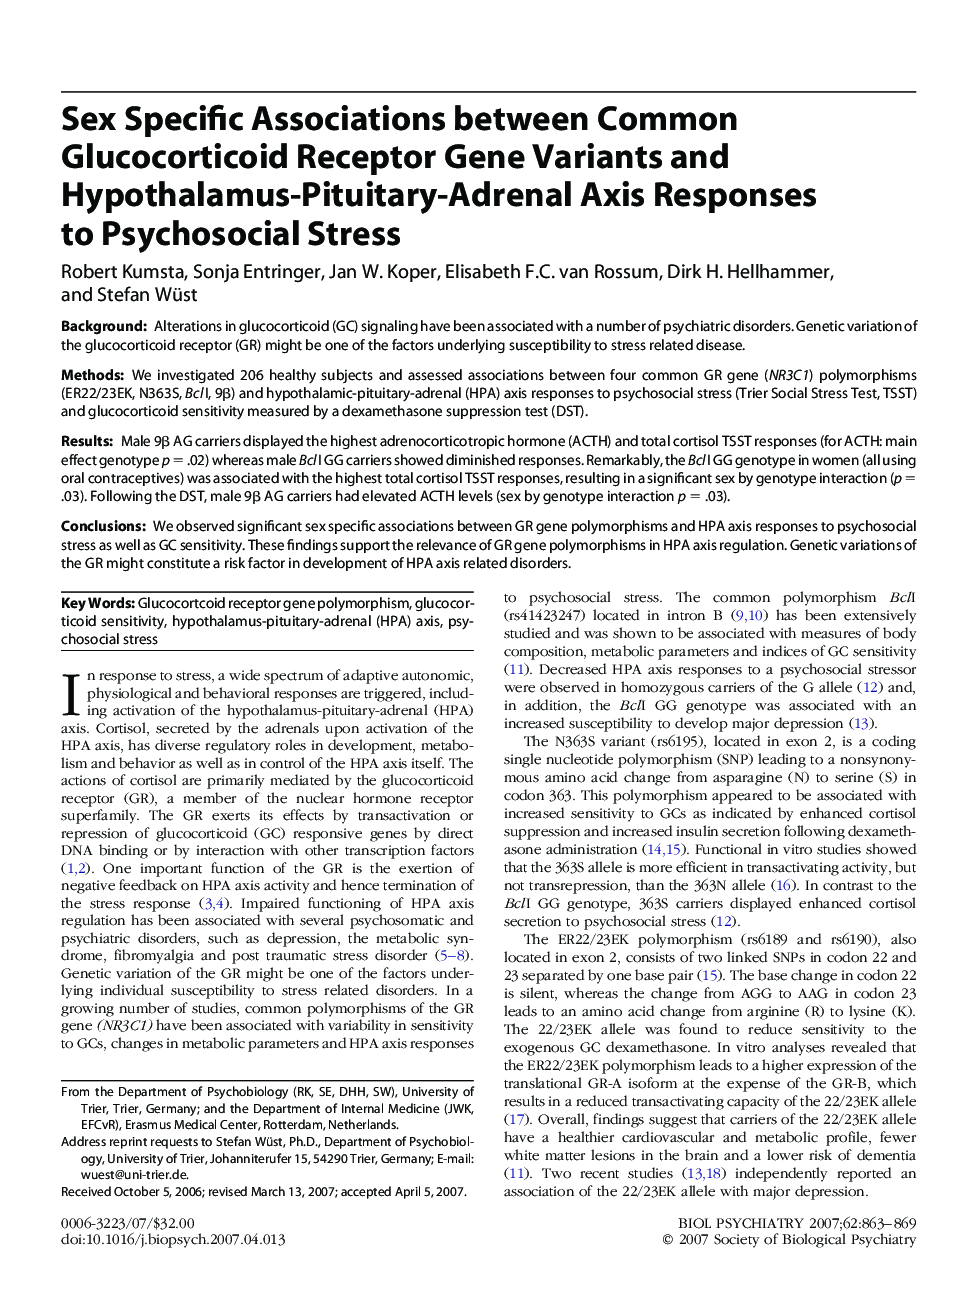 Sex Specific Associations between Common Glucocorticoid Receptor Gene Variants and Hypothalamus-Pituitary-Adrenal Axis Responses to Psychosocial Stress